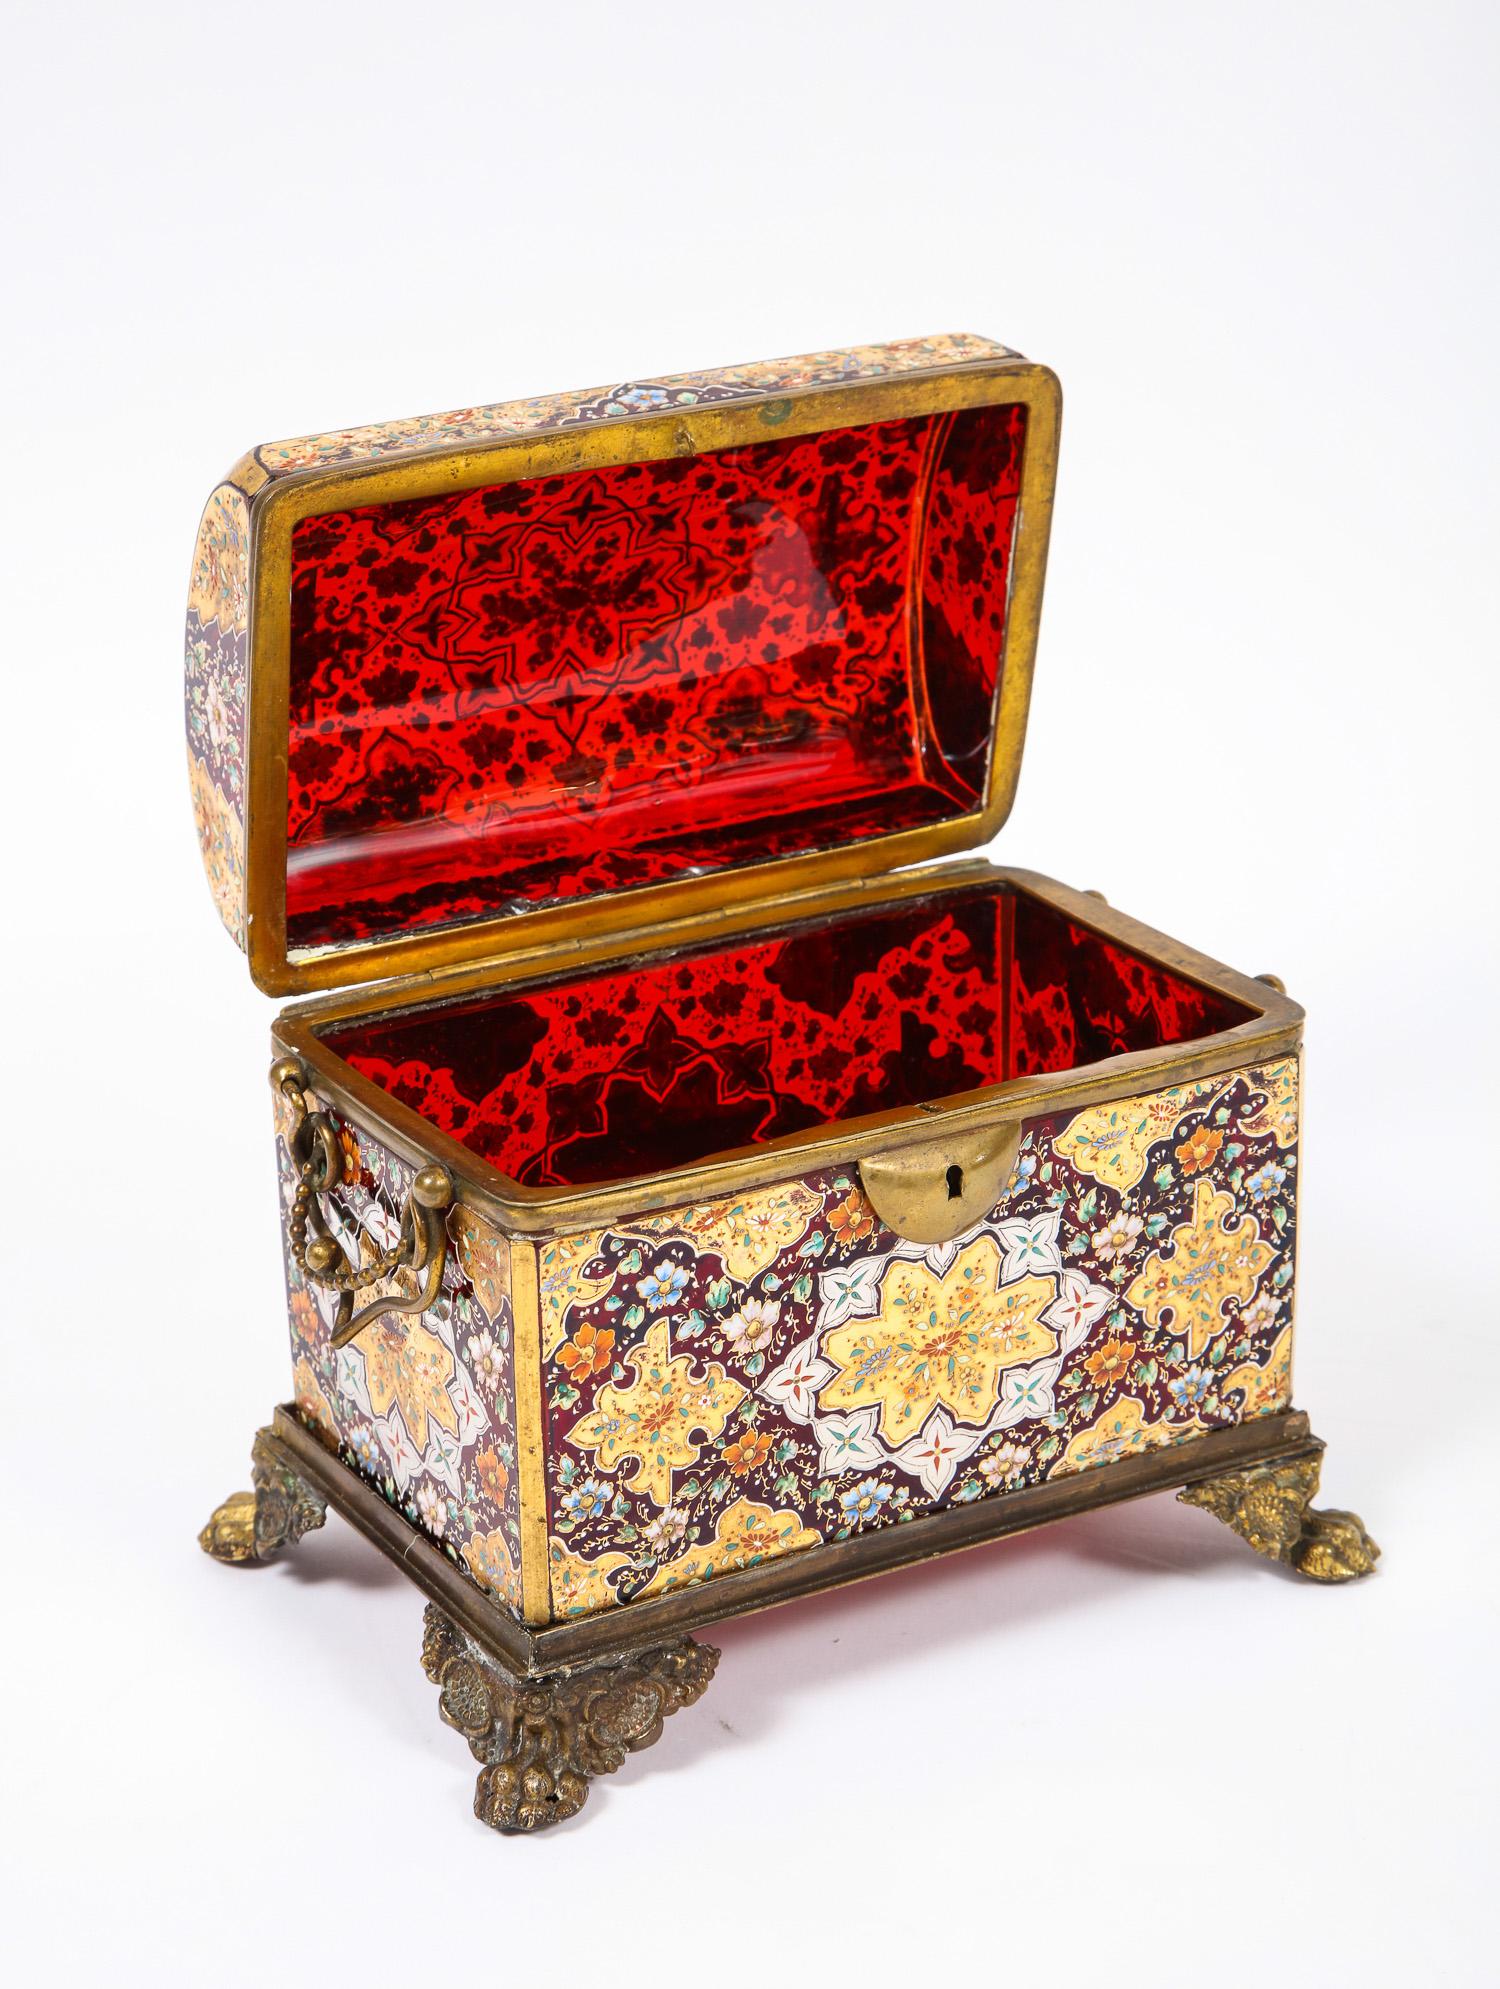 Late 19th Century Red-Cranberry Moser Crystal and Enameled Box Made for the Islamic/Moorish Market